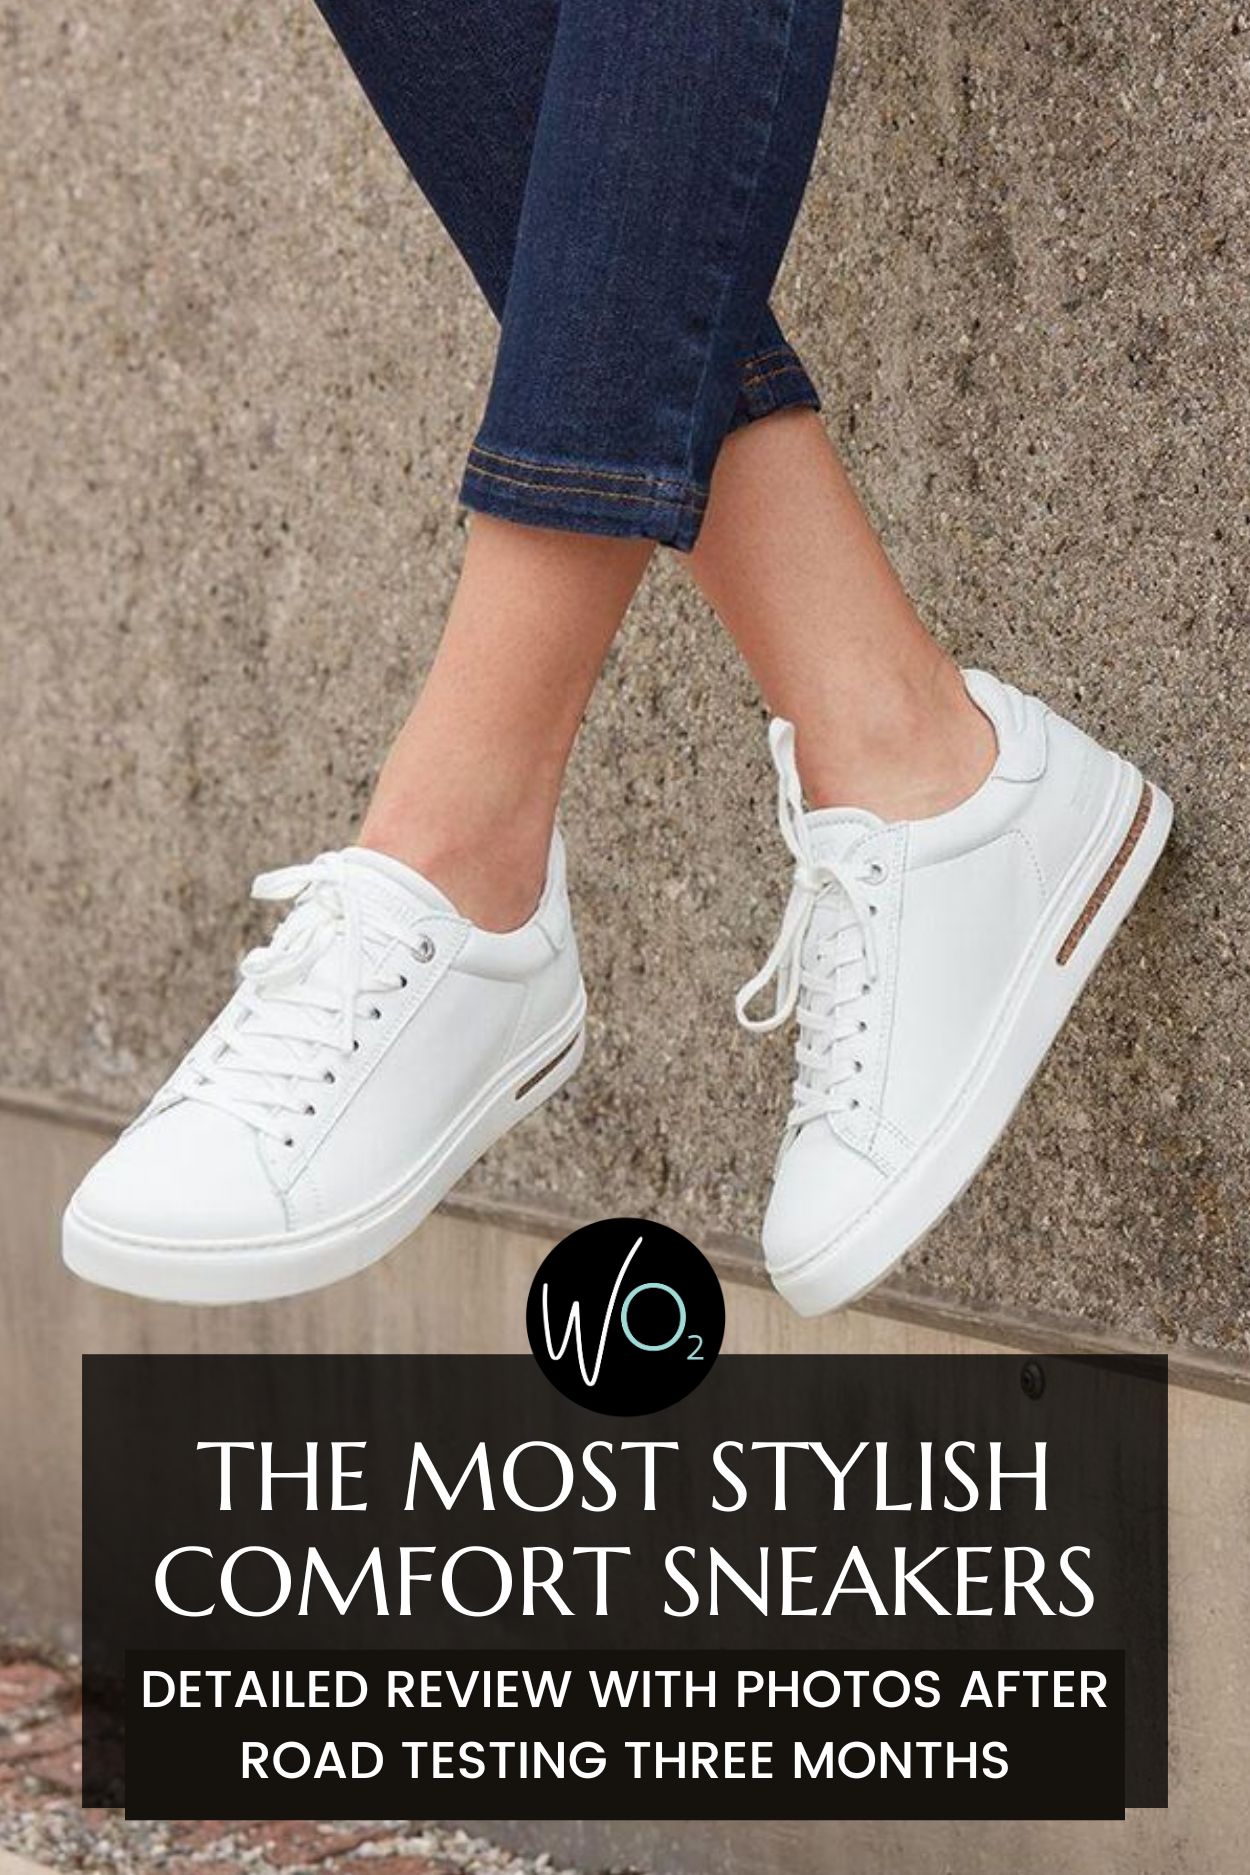 The 6 Trendy Sneakers You Can't Miss! (2021)